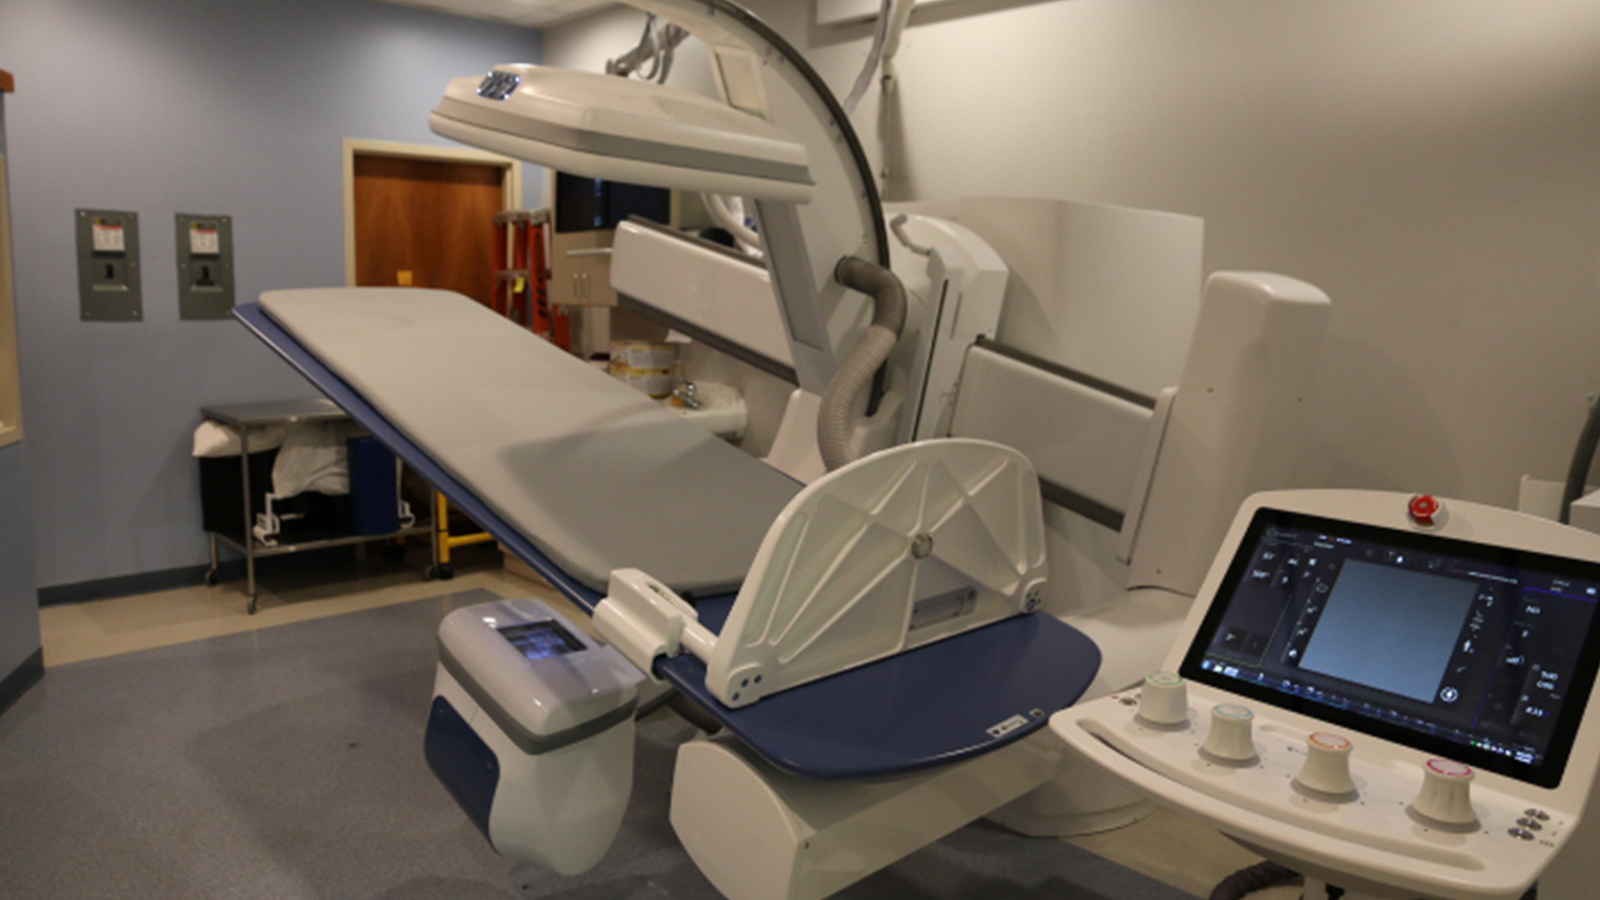 CMS Imaging announces the first clinical installation in the US of the Intelli-C at ImageCare, LLC